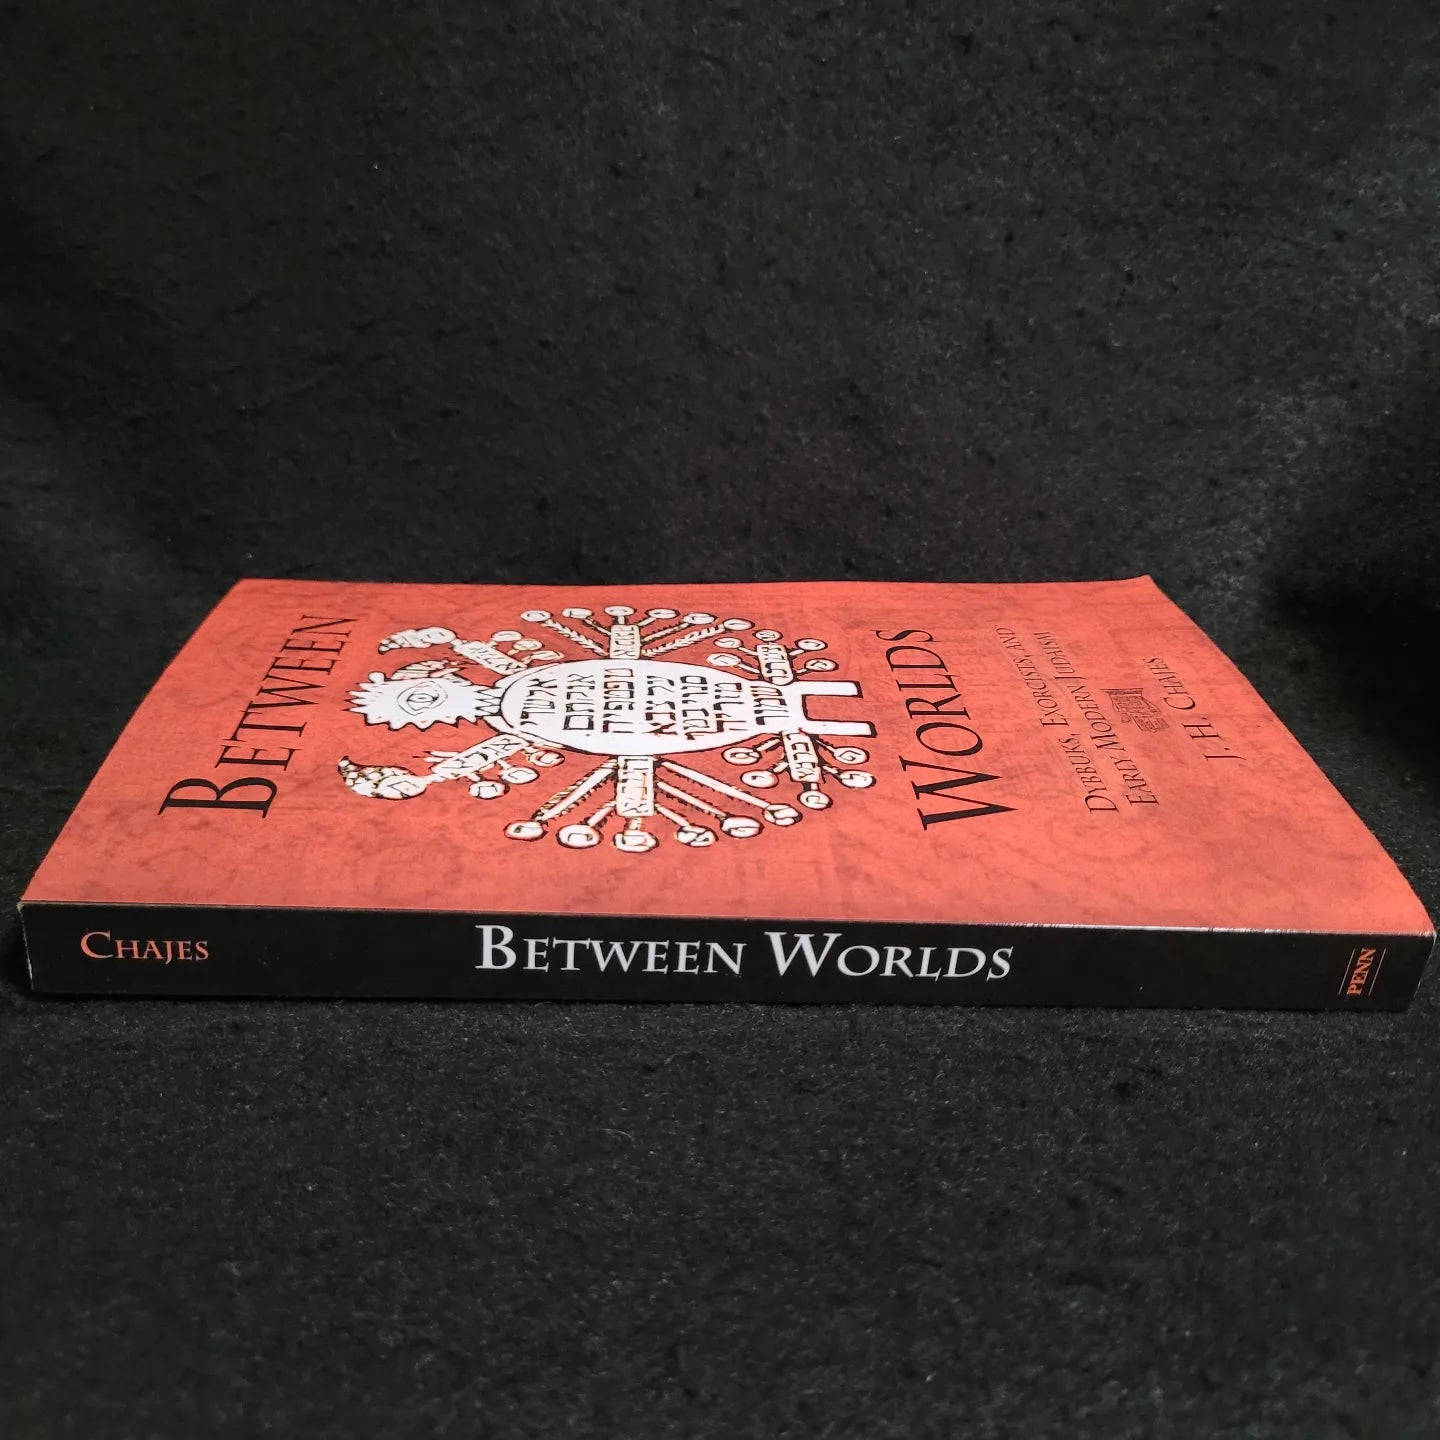 Between Worlds: Dybbuks, Exorcists, and Early Modern Judaism by J.H. Chajes (University of Pennsylvania Press, 2003) Paperback